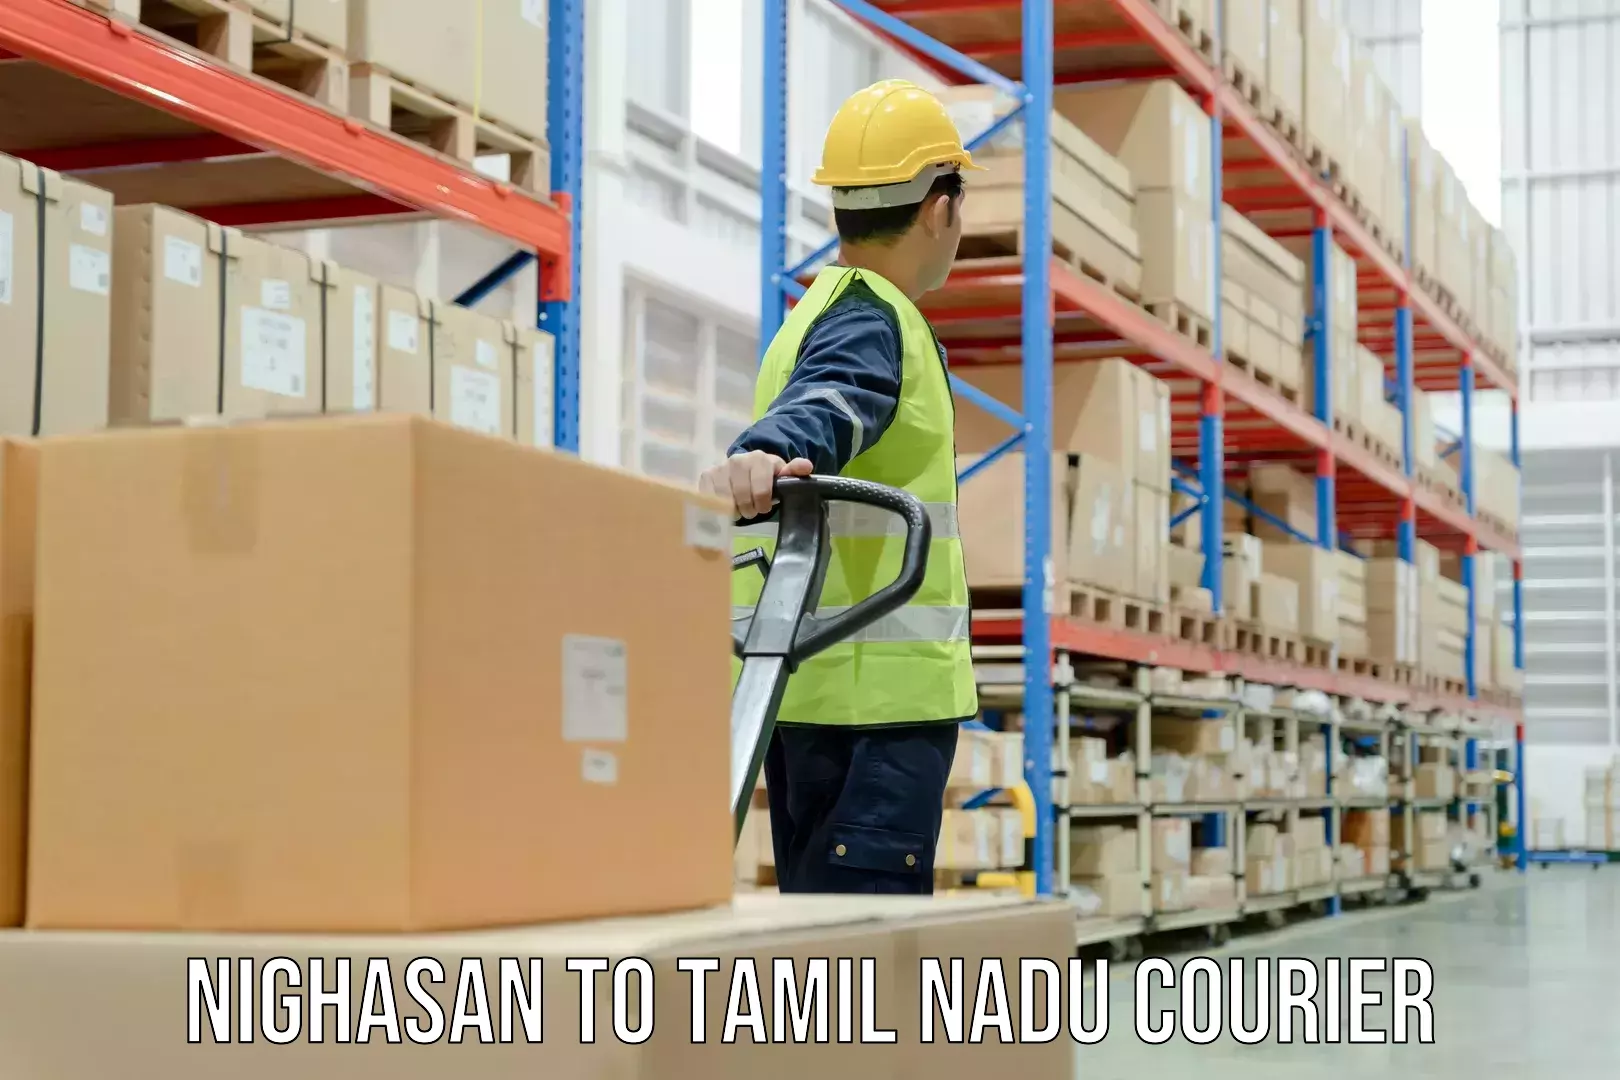 Automated parcel services Nighasan to Thiruthuraipoondi